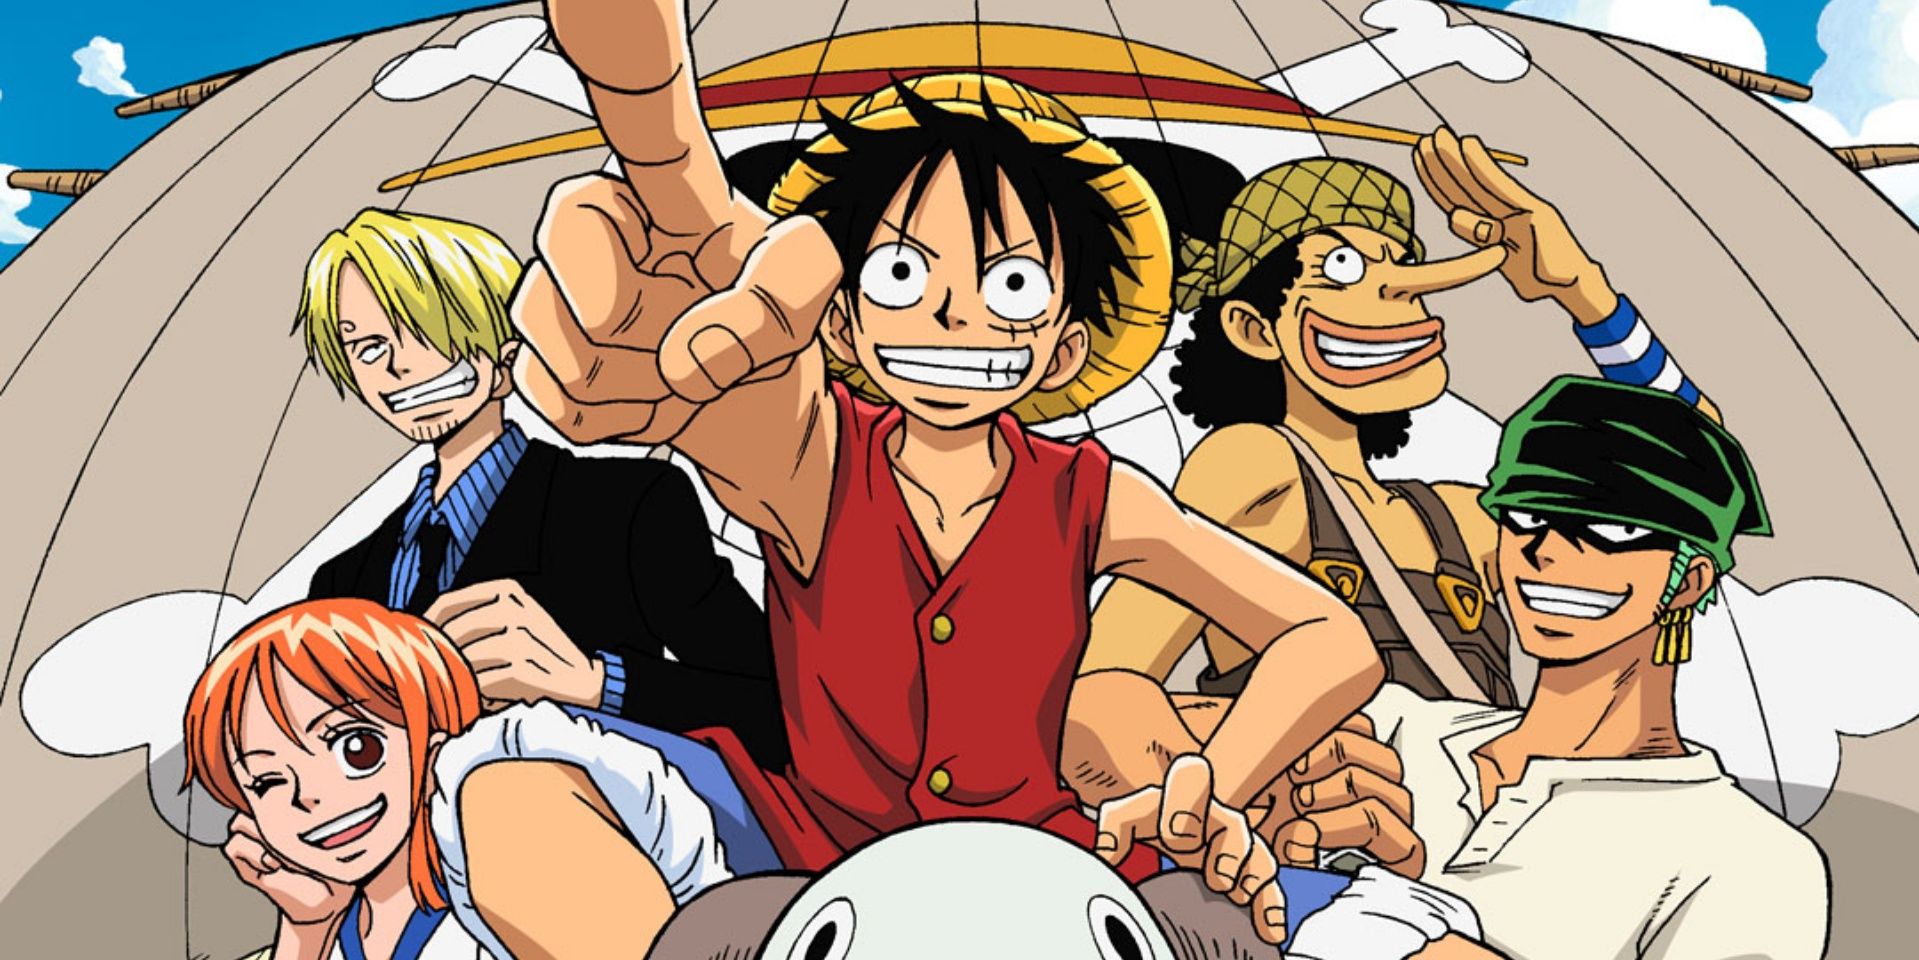 The Straw Hat Pirates of One Piece